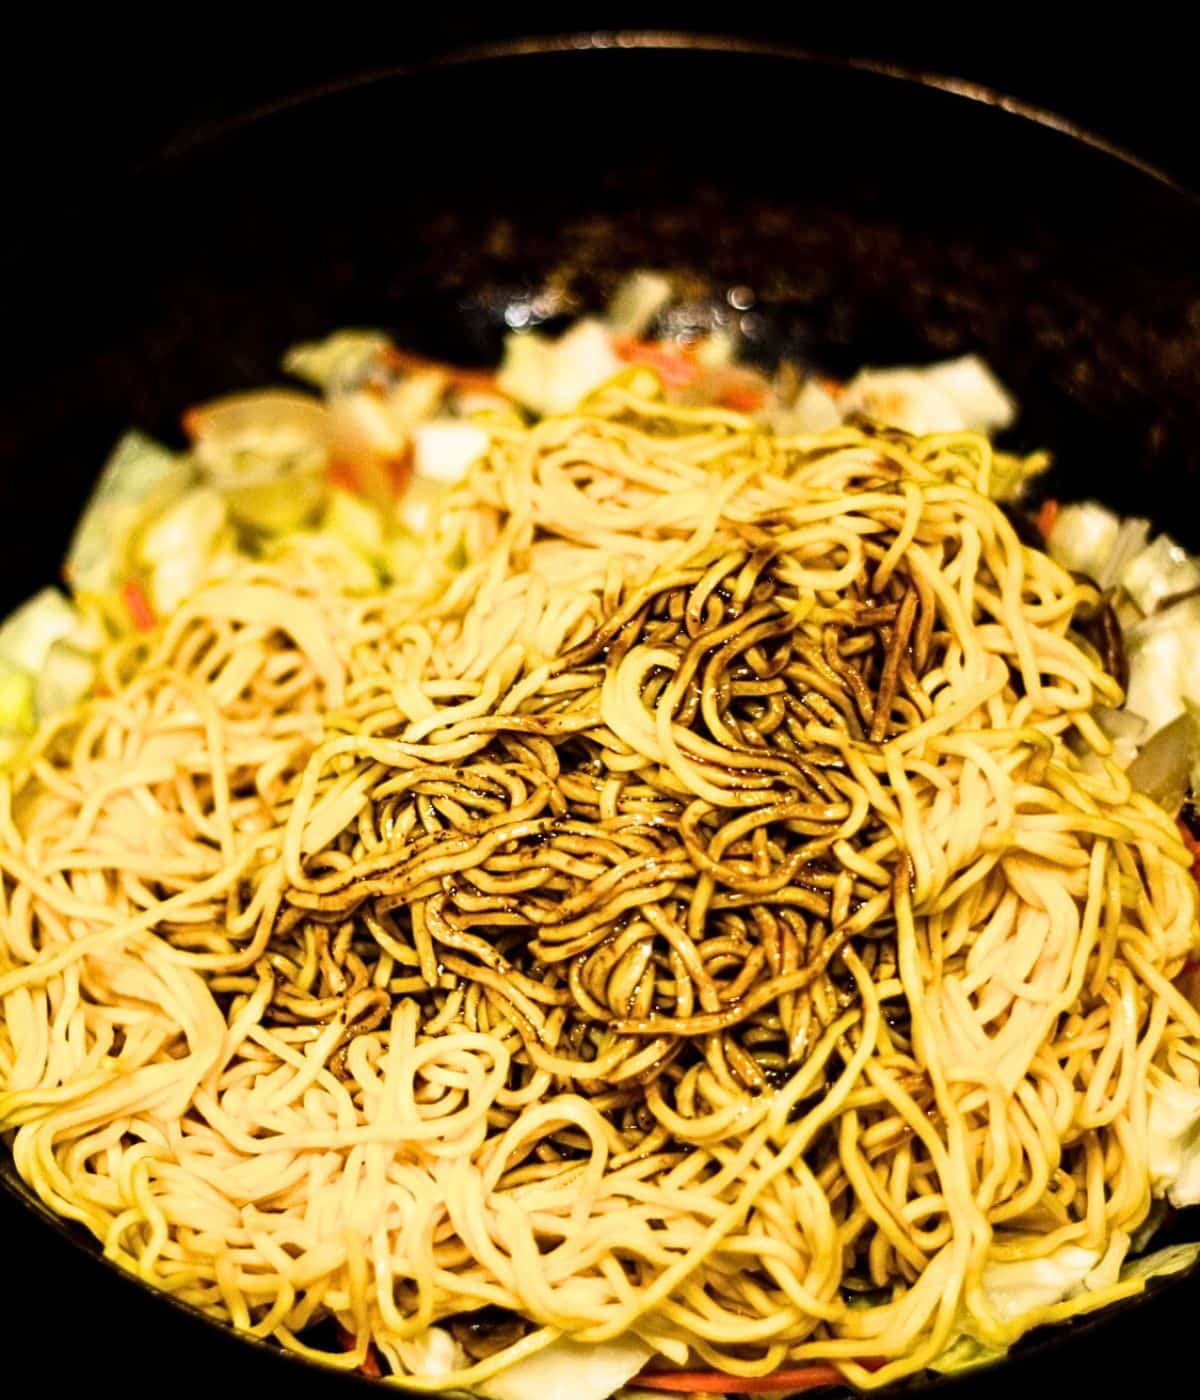 Adding yakisoba noodles and sauce to the dish.